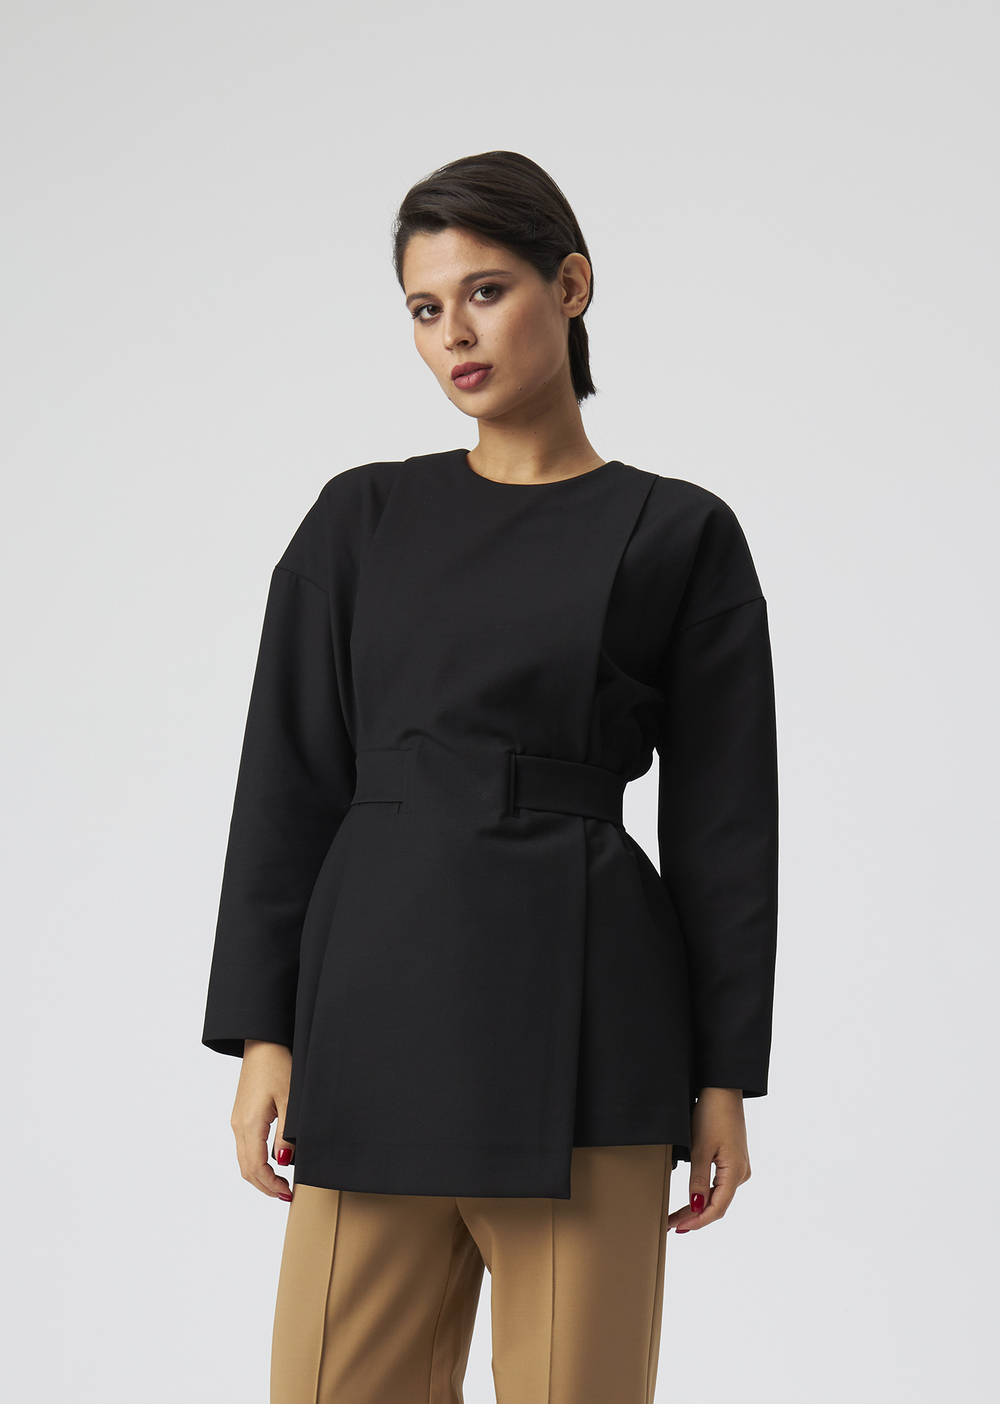 BLOUSE WITH A BELT | S | BLACK